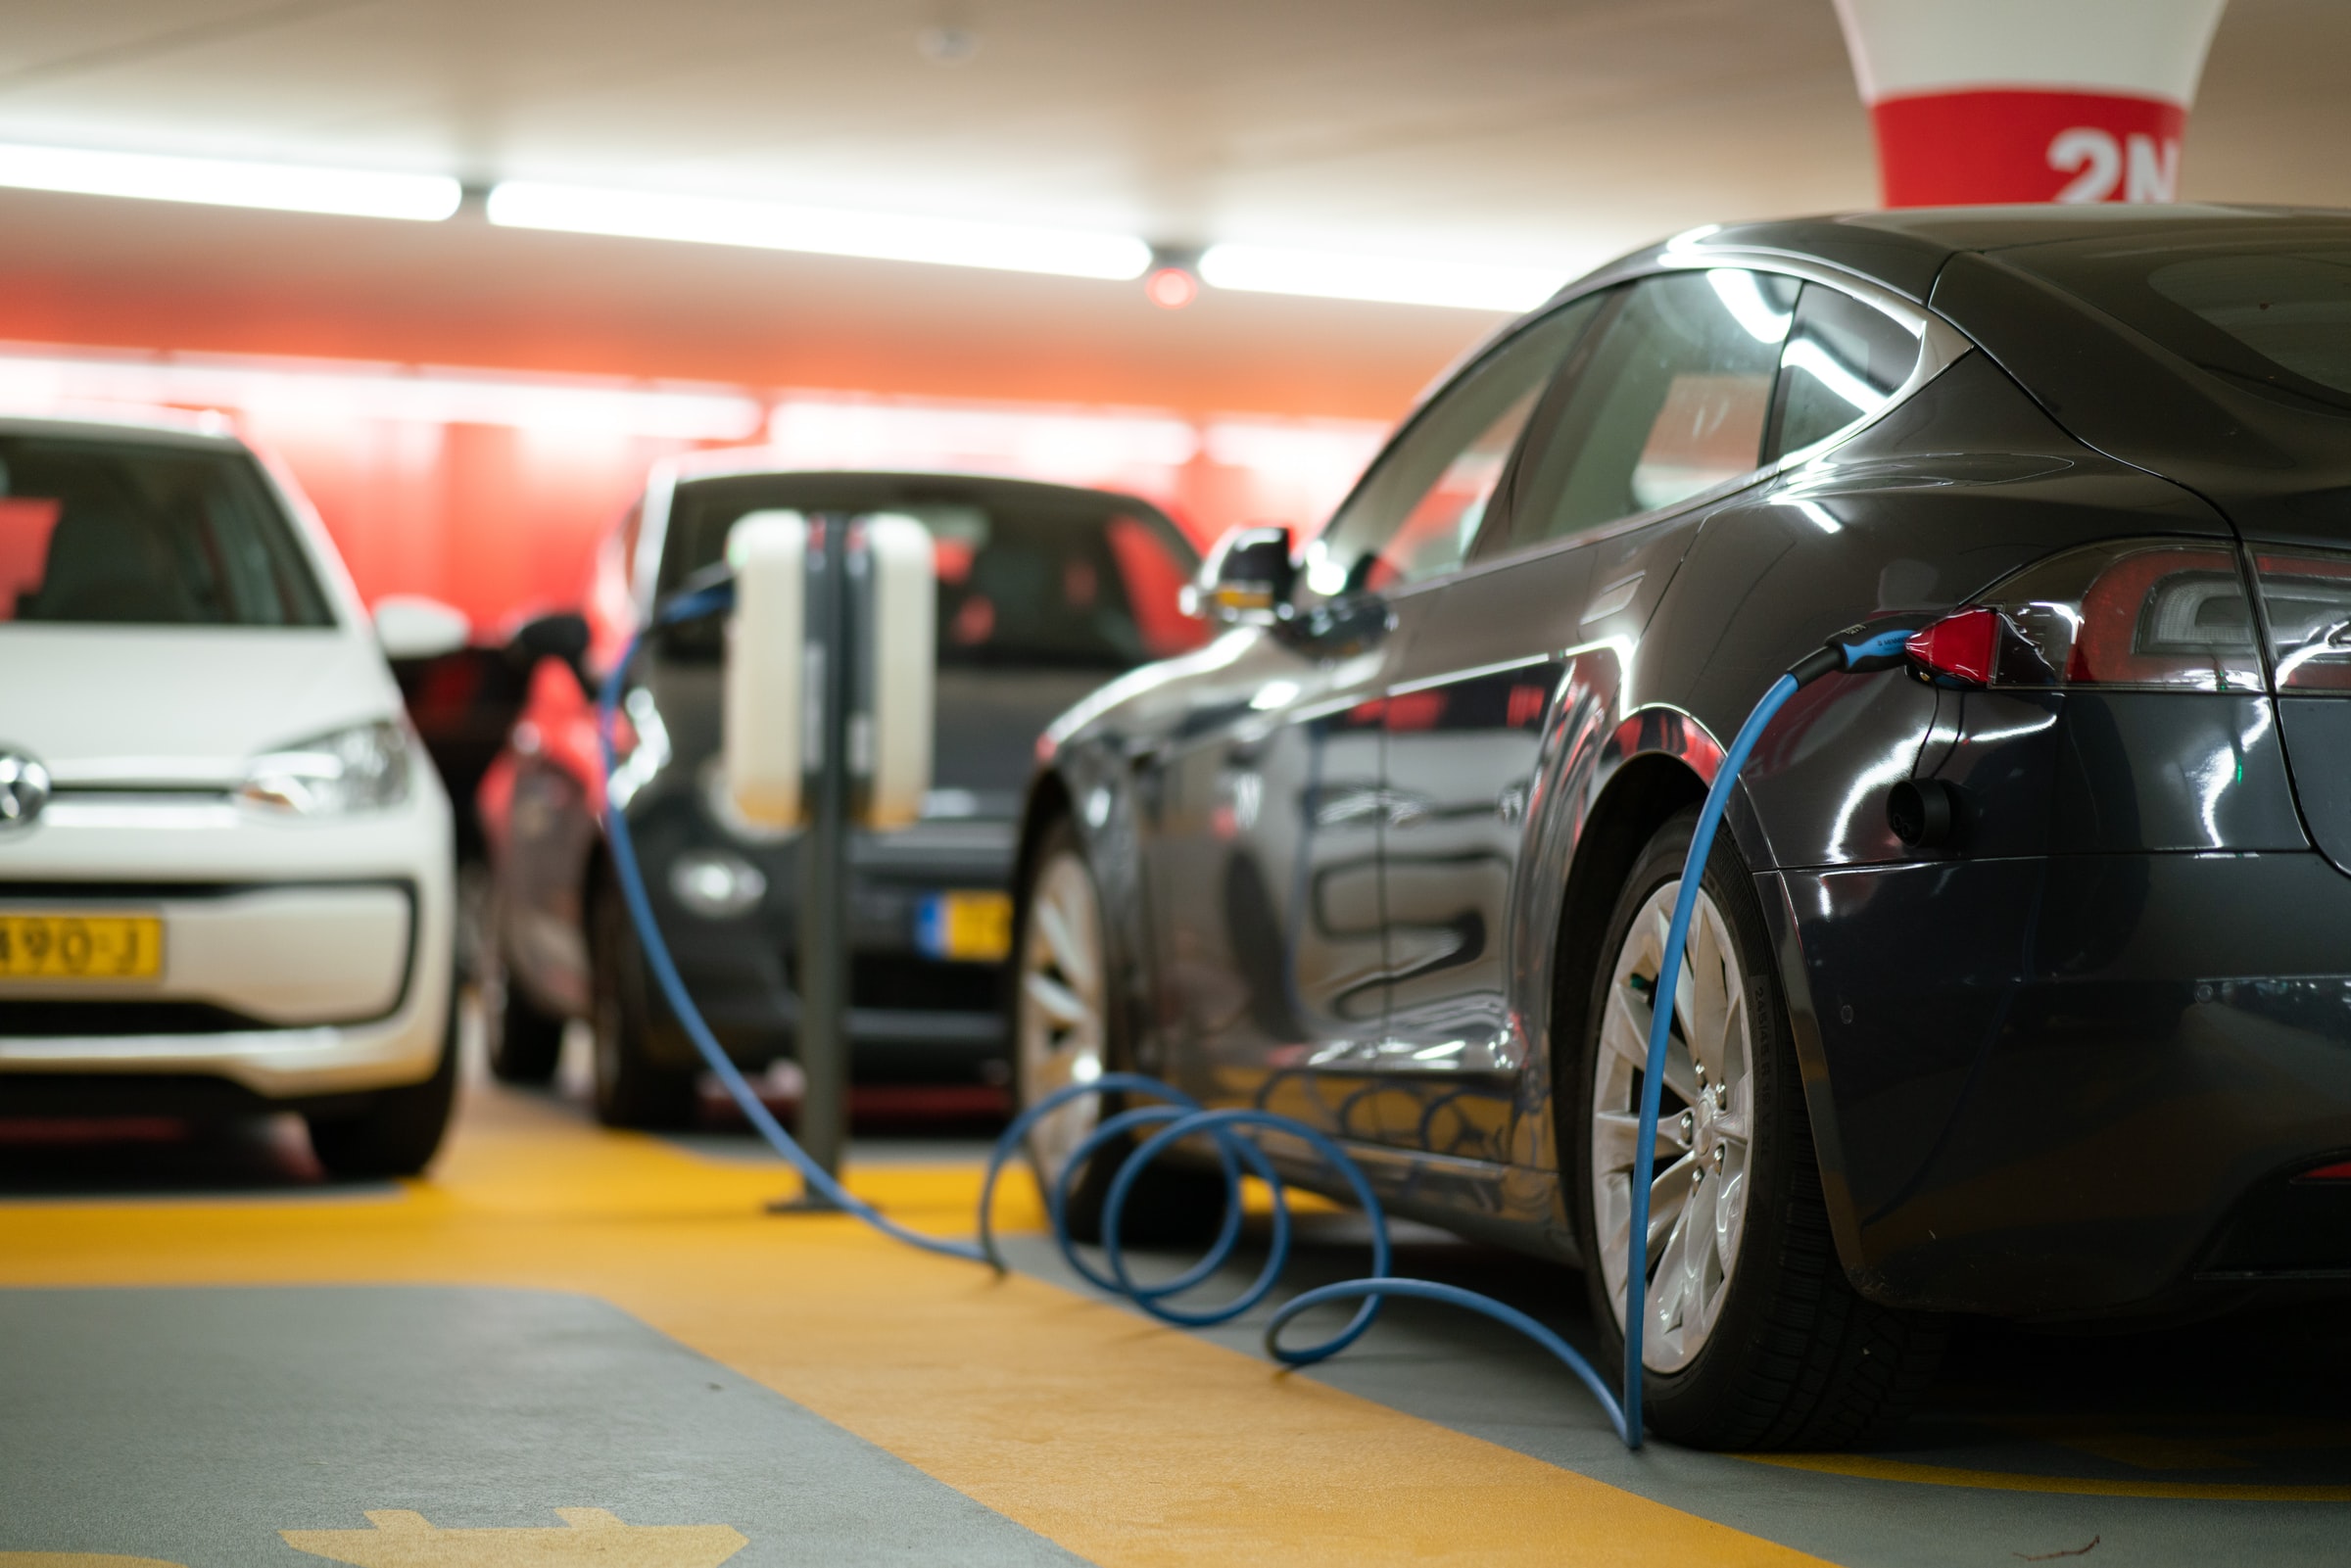 Should You Leave Your Electric Vehicle Plugged In While on Vacation? Best Practices and Tips for EV Owners